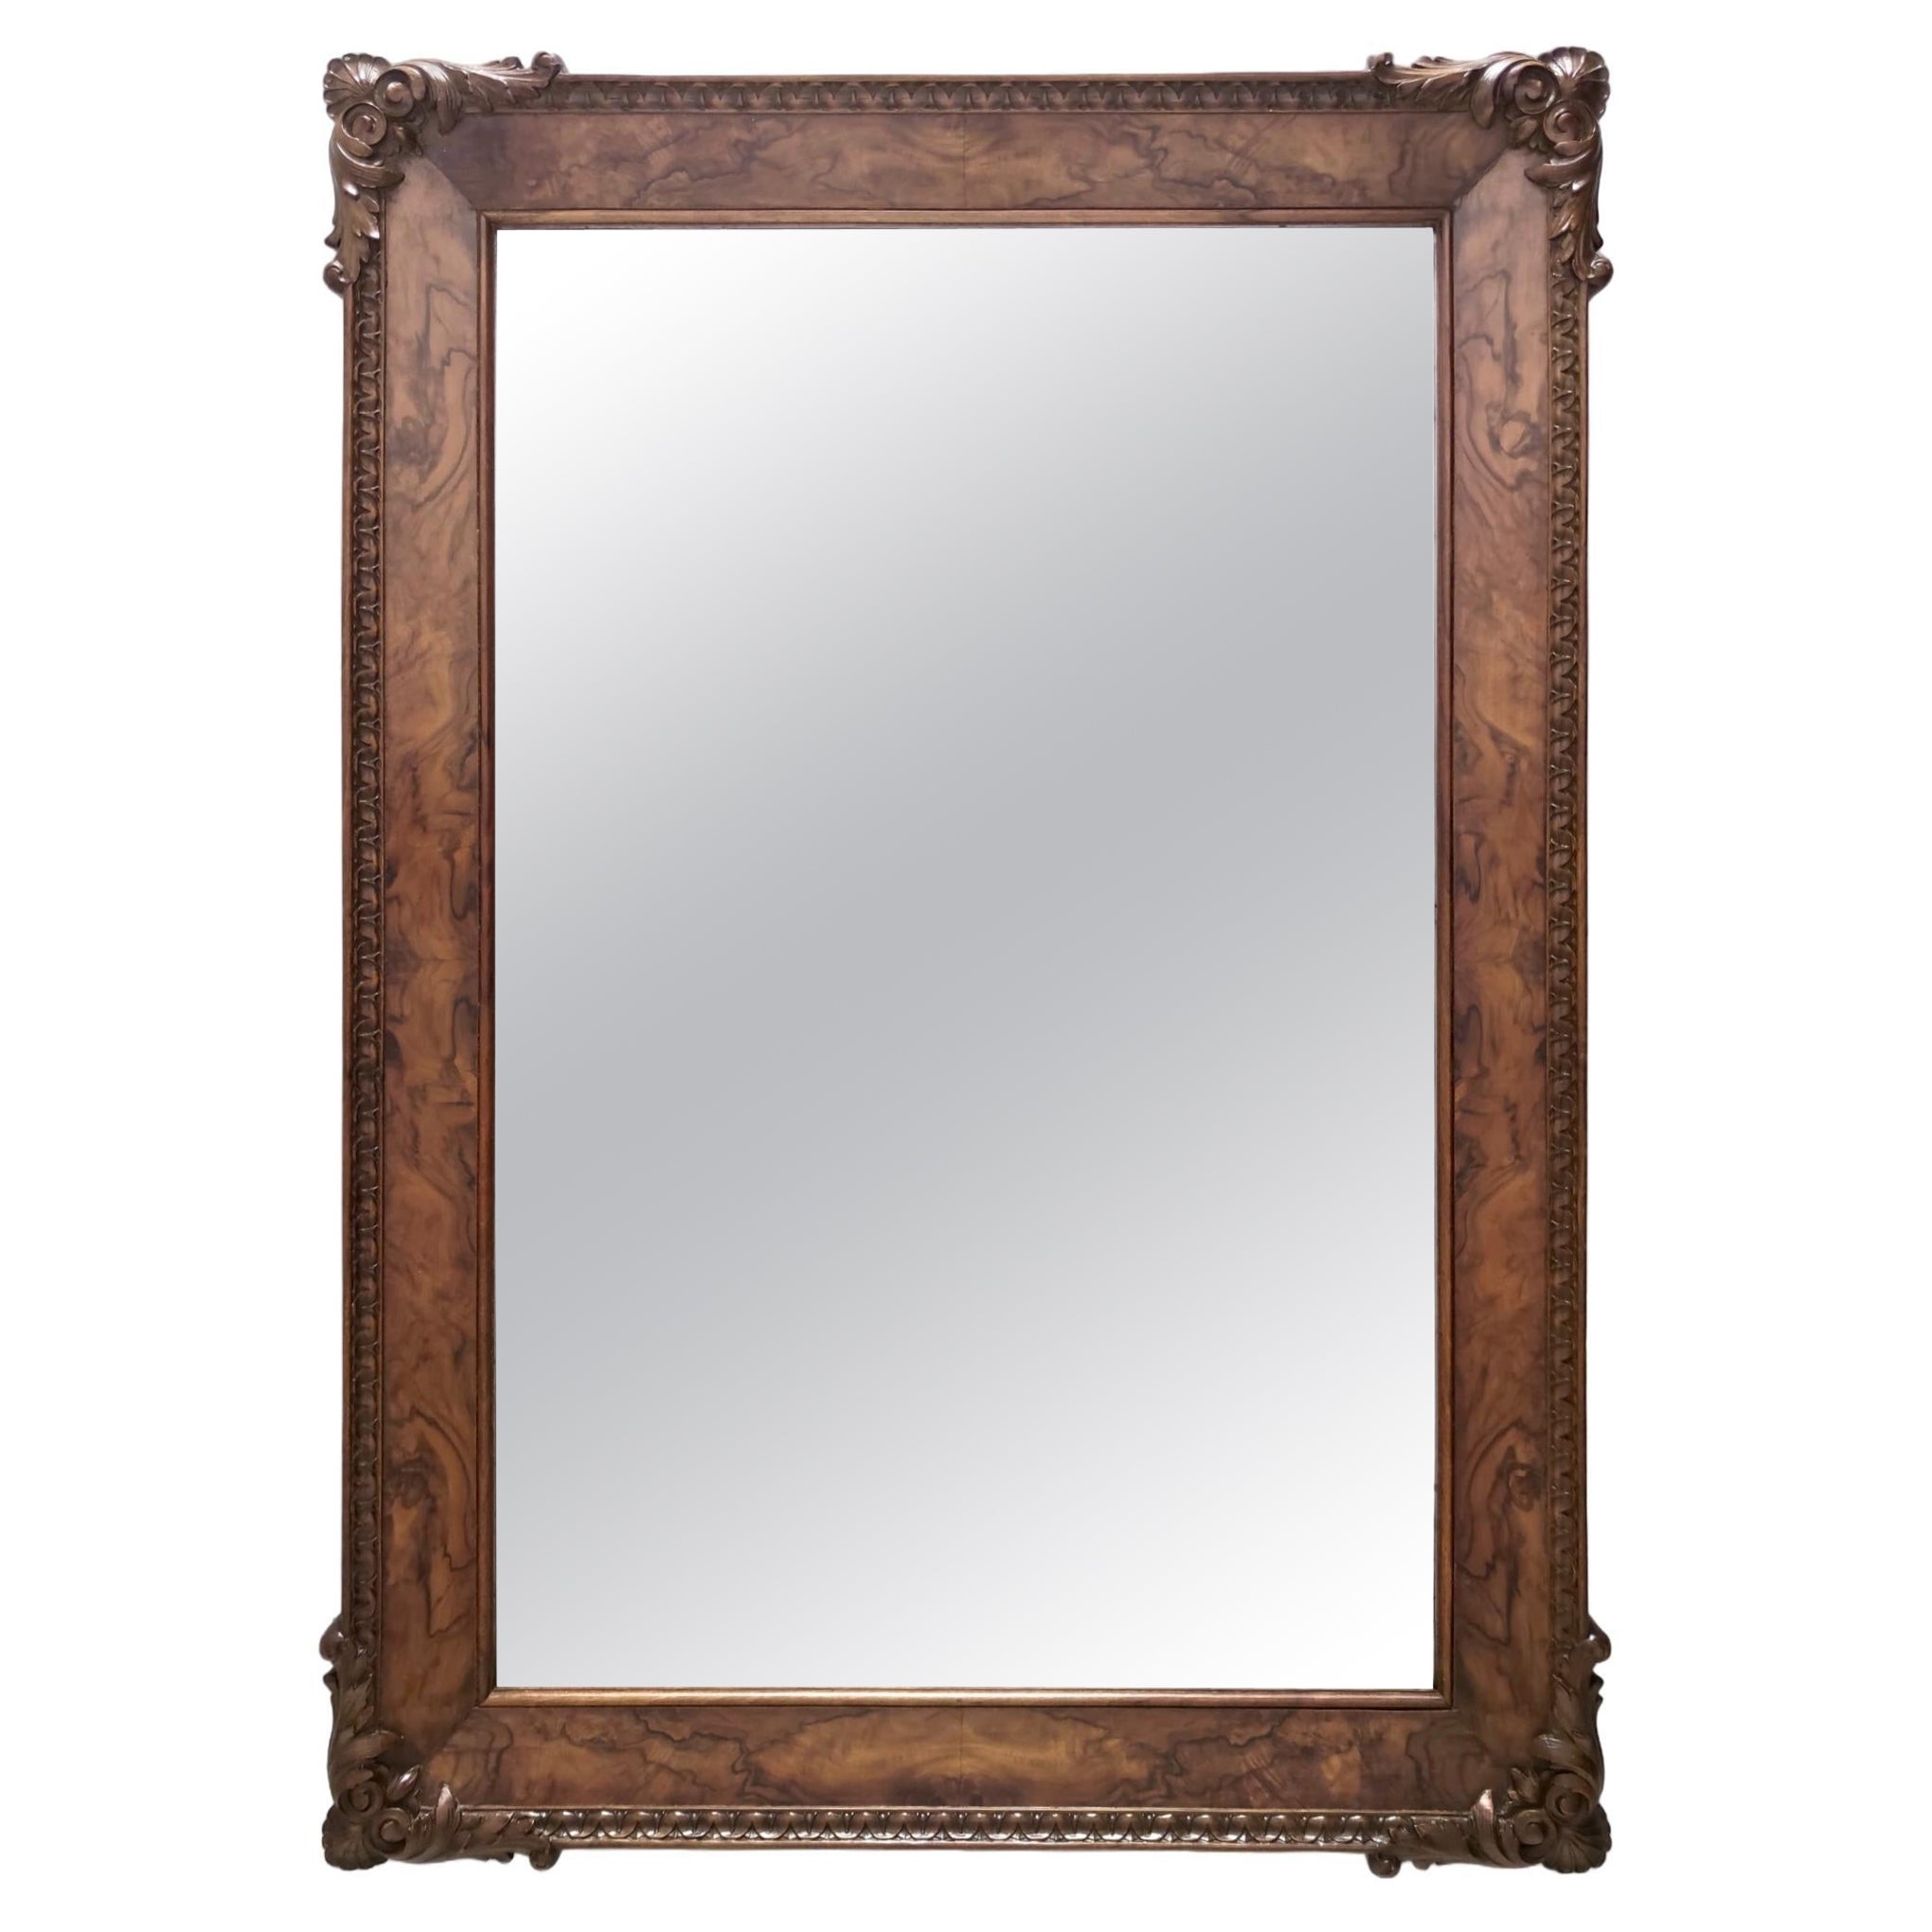 Vintage High-quality Wall Mirror with Beech and Walnut Frame, Italy